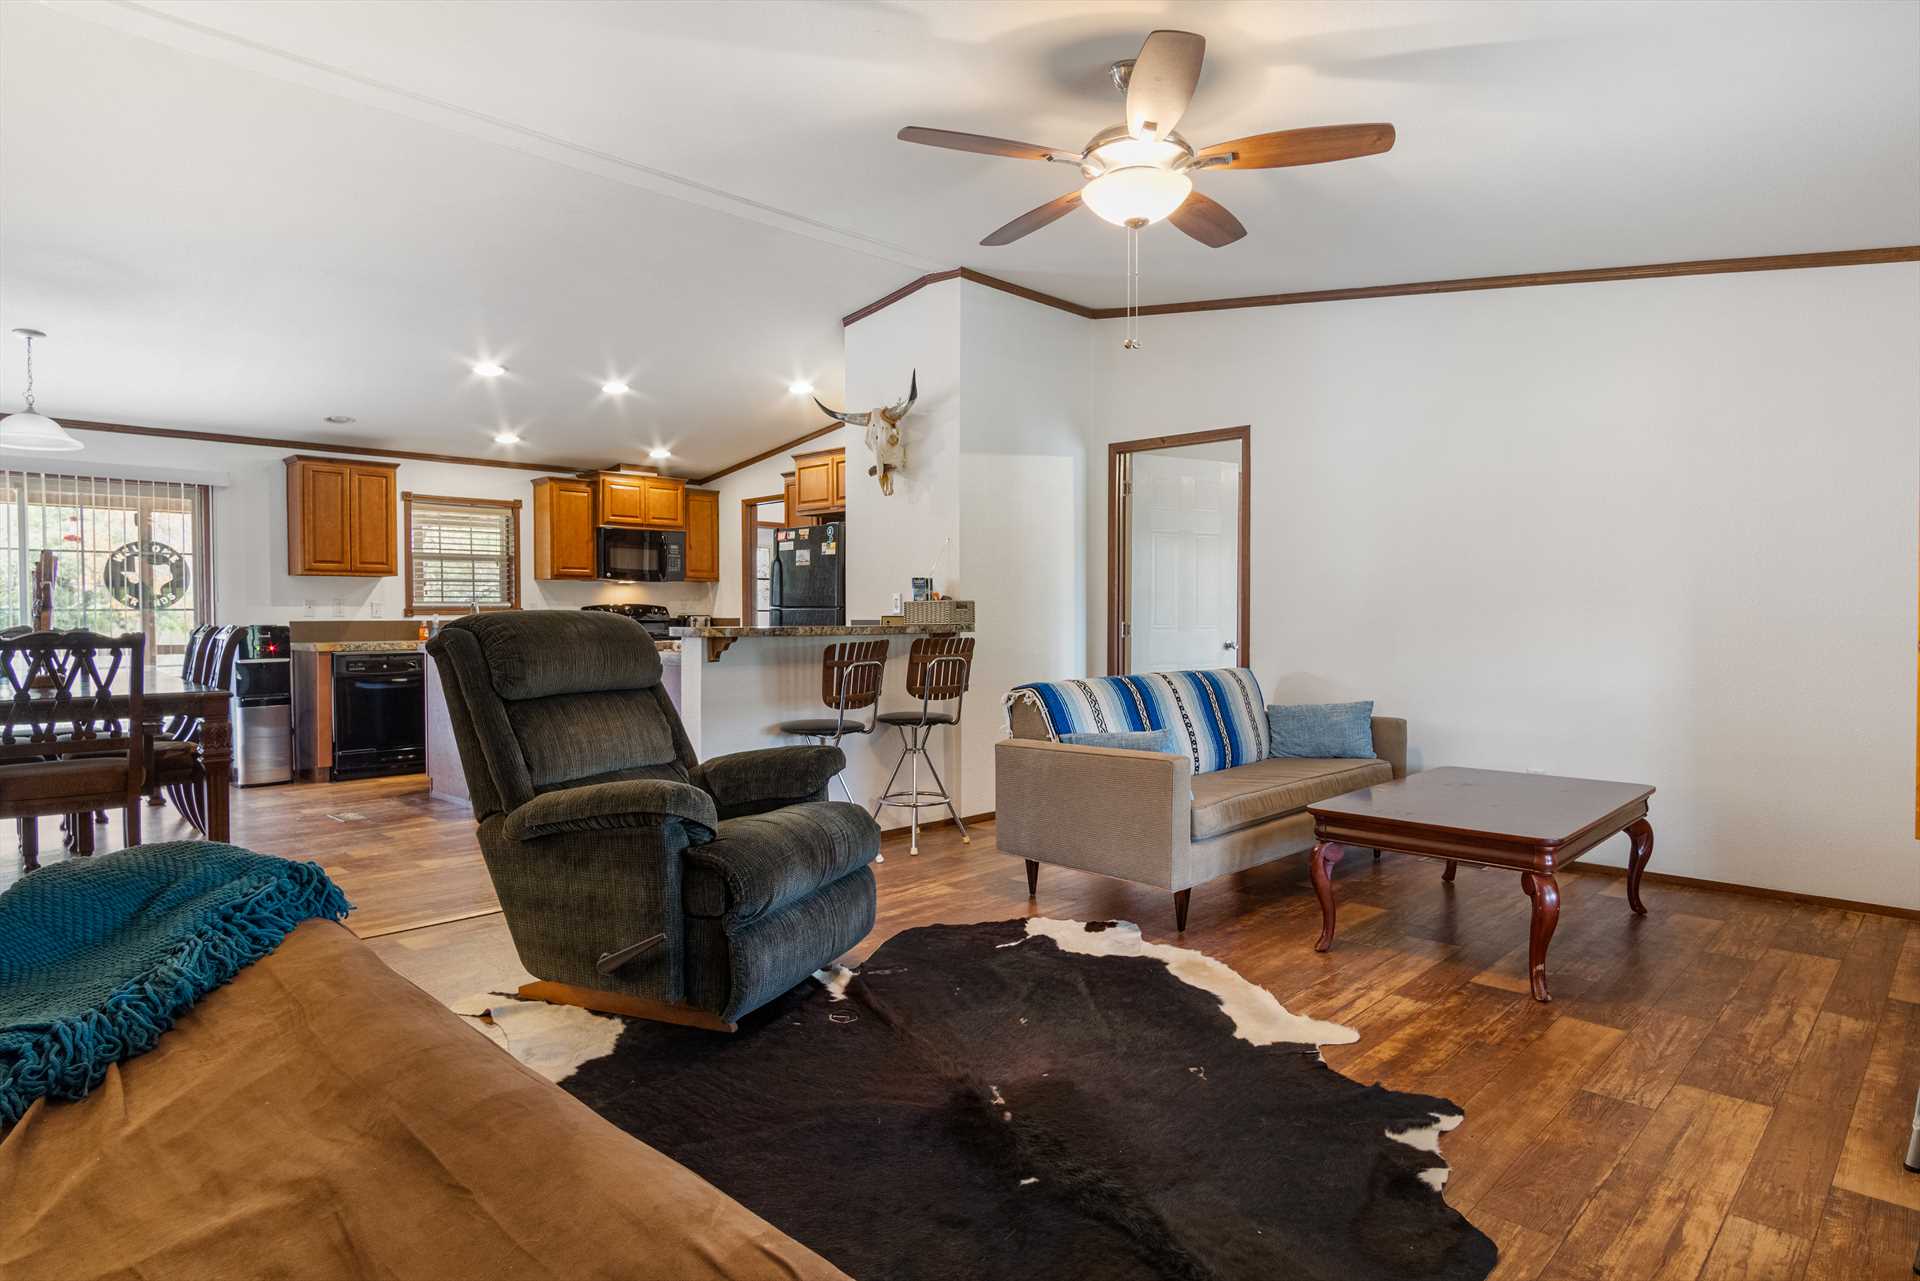                                                 The open floor plan here allows plenty of space for everyone, and no matter where you are you'll be part of the fun!